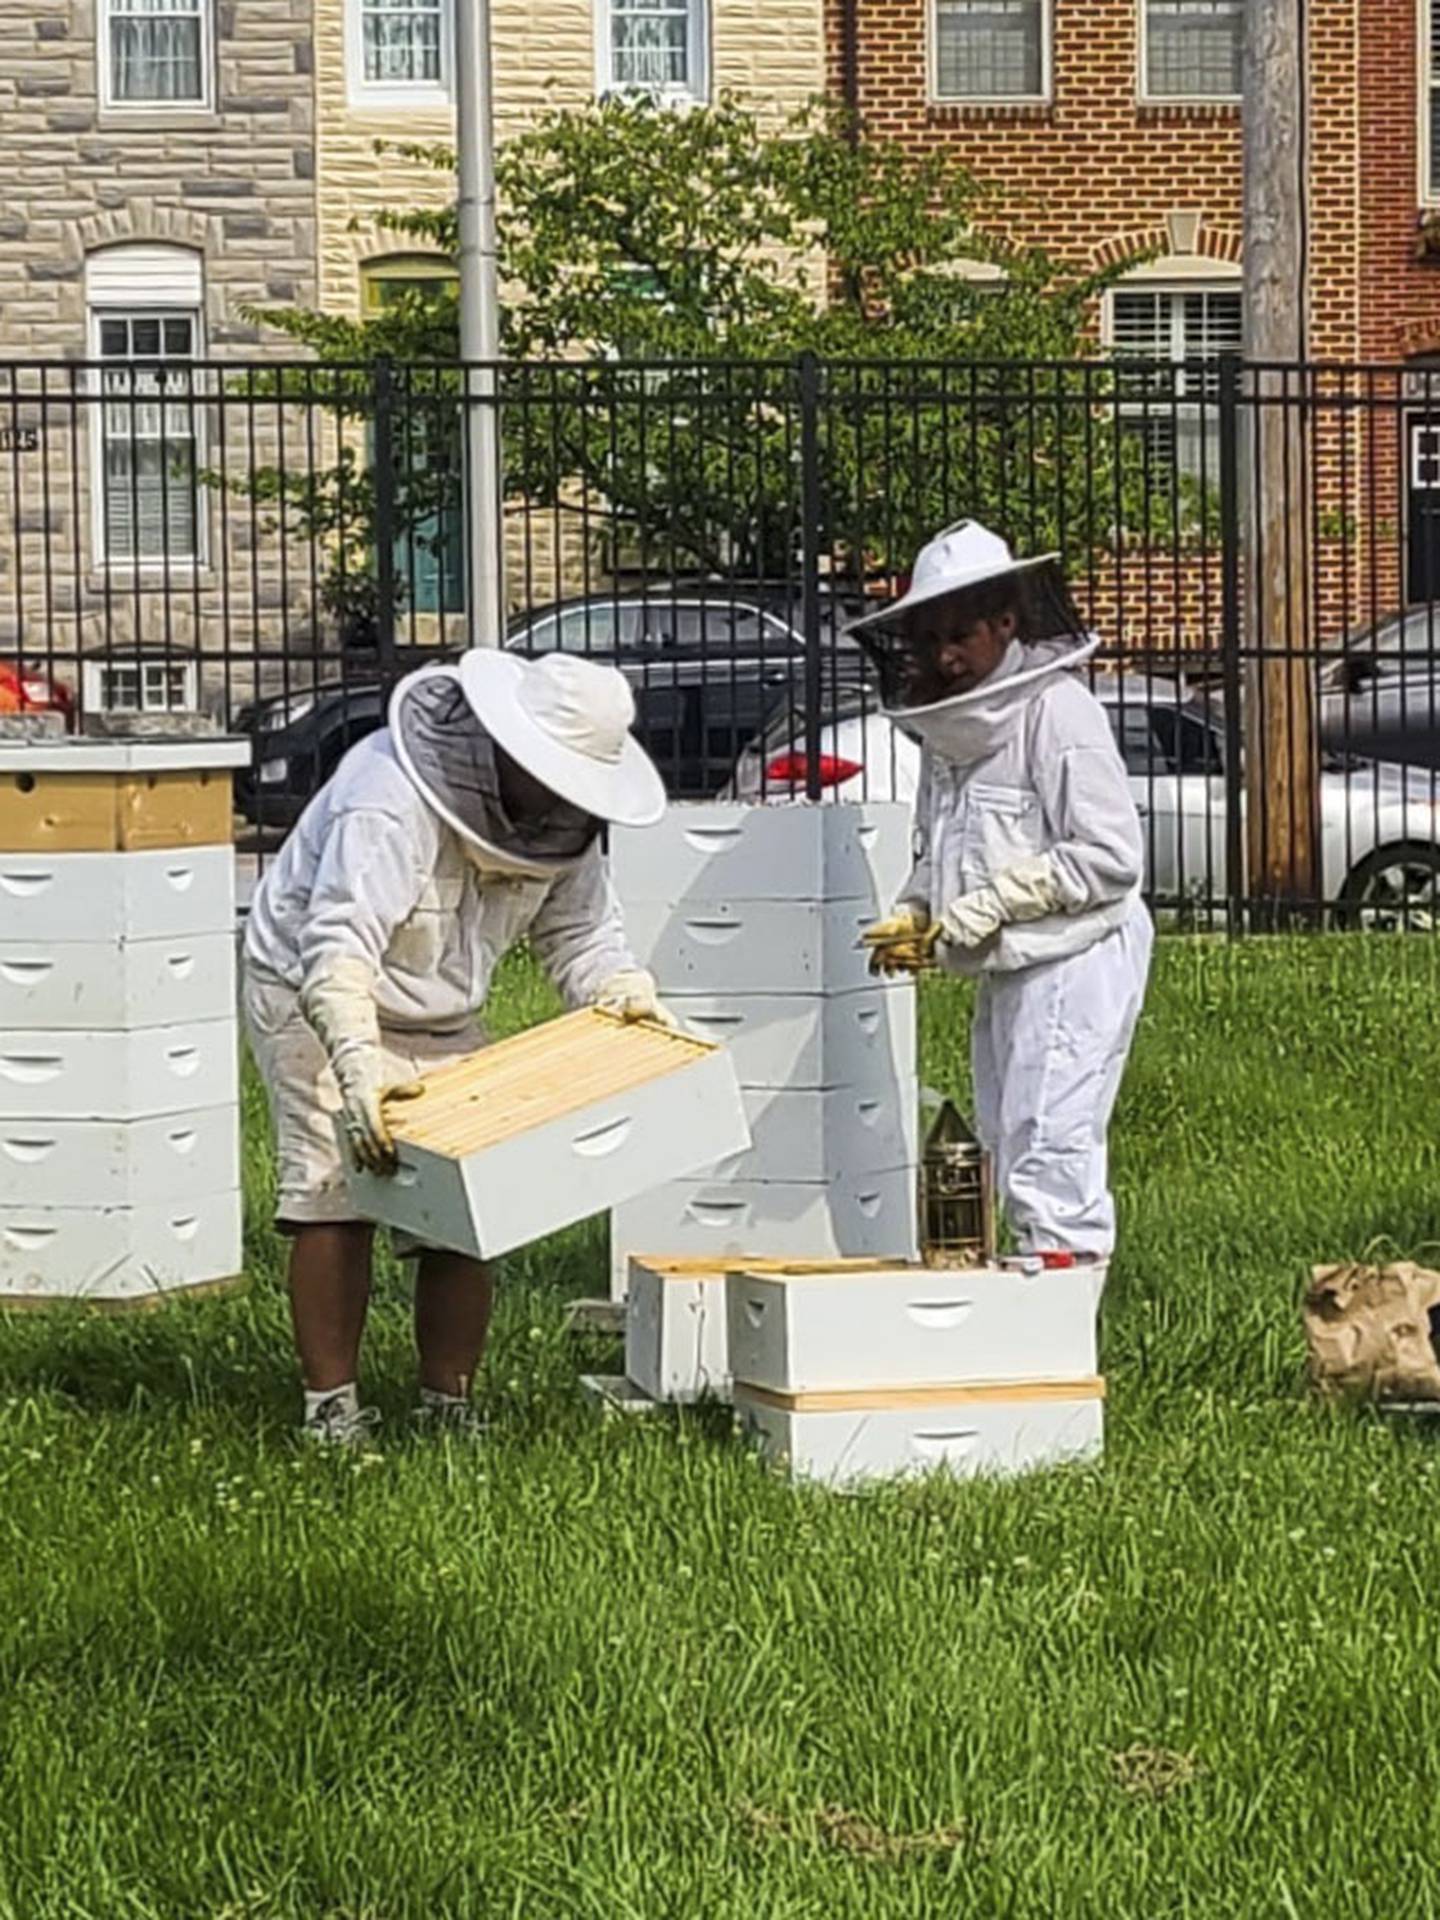 Bee keepers tending to the bees in the garden. (Photos courtesy of Dave Arndt)